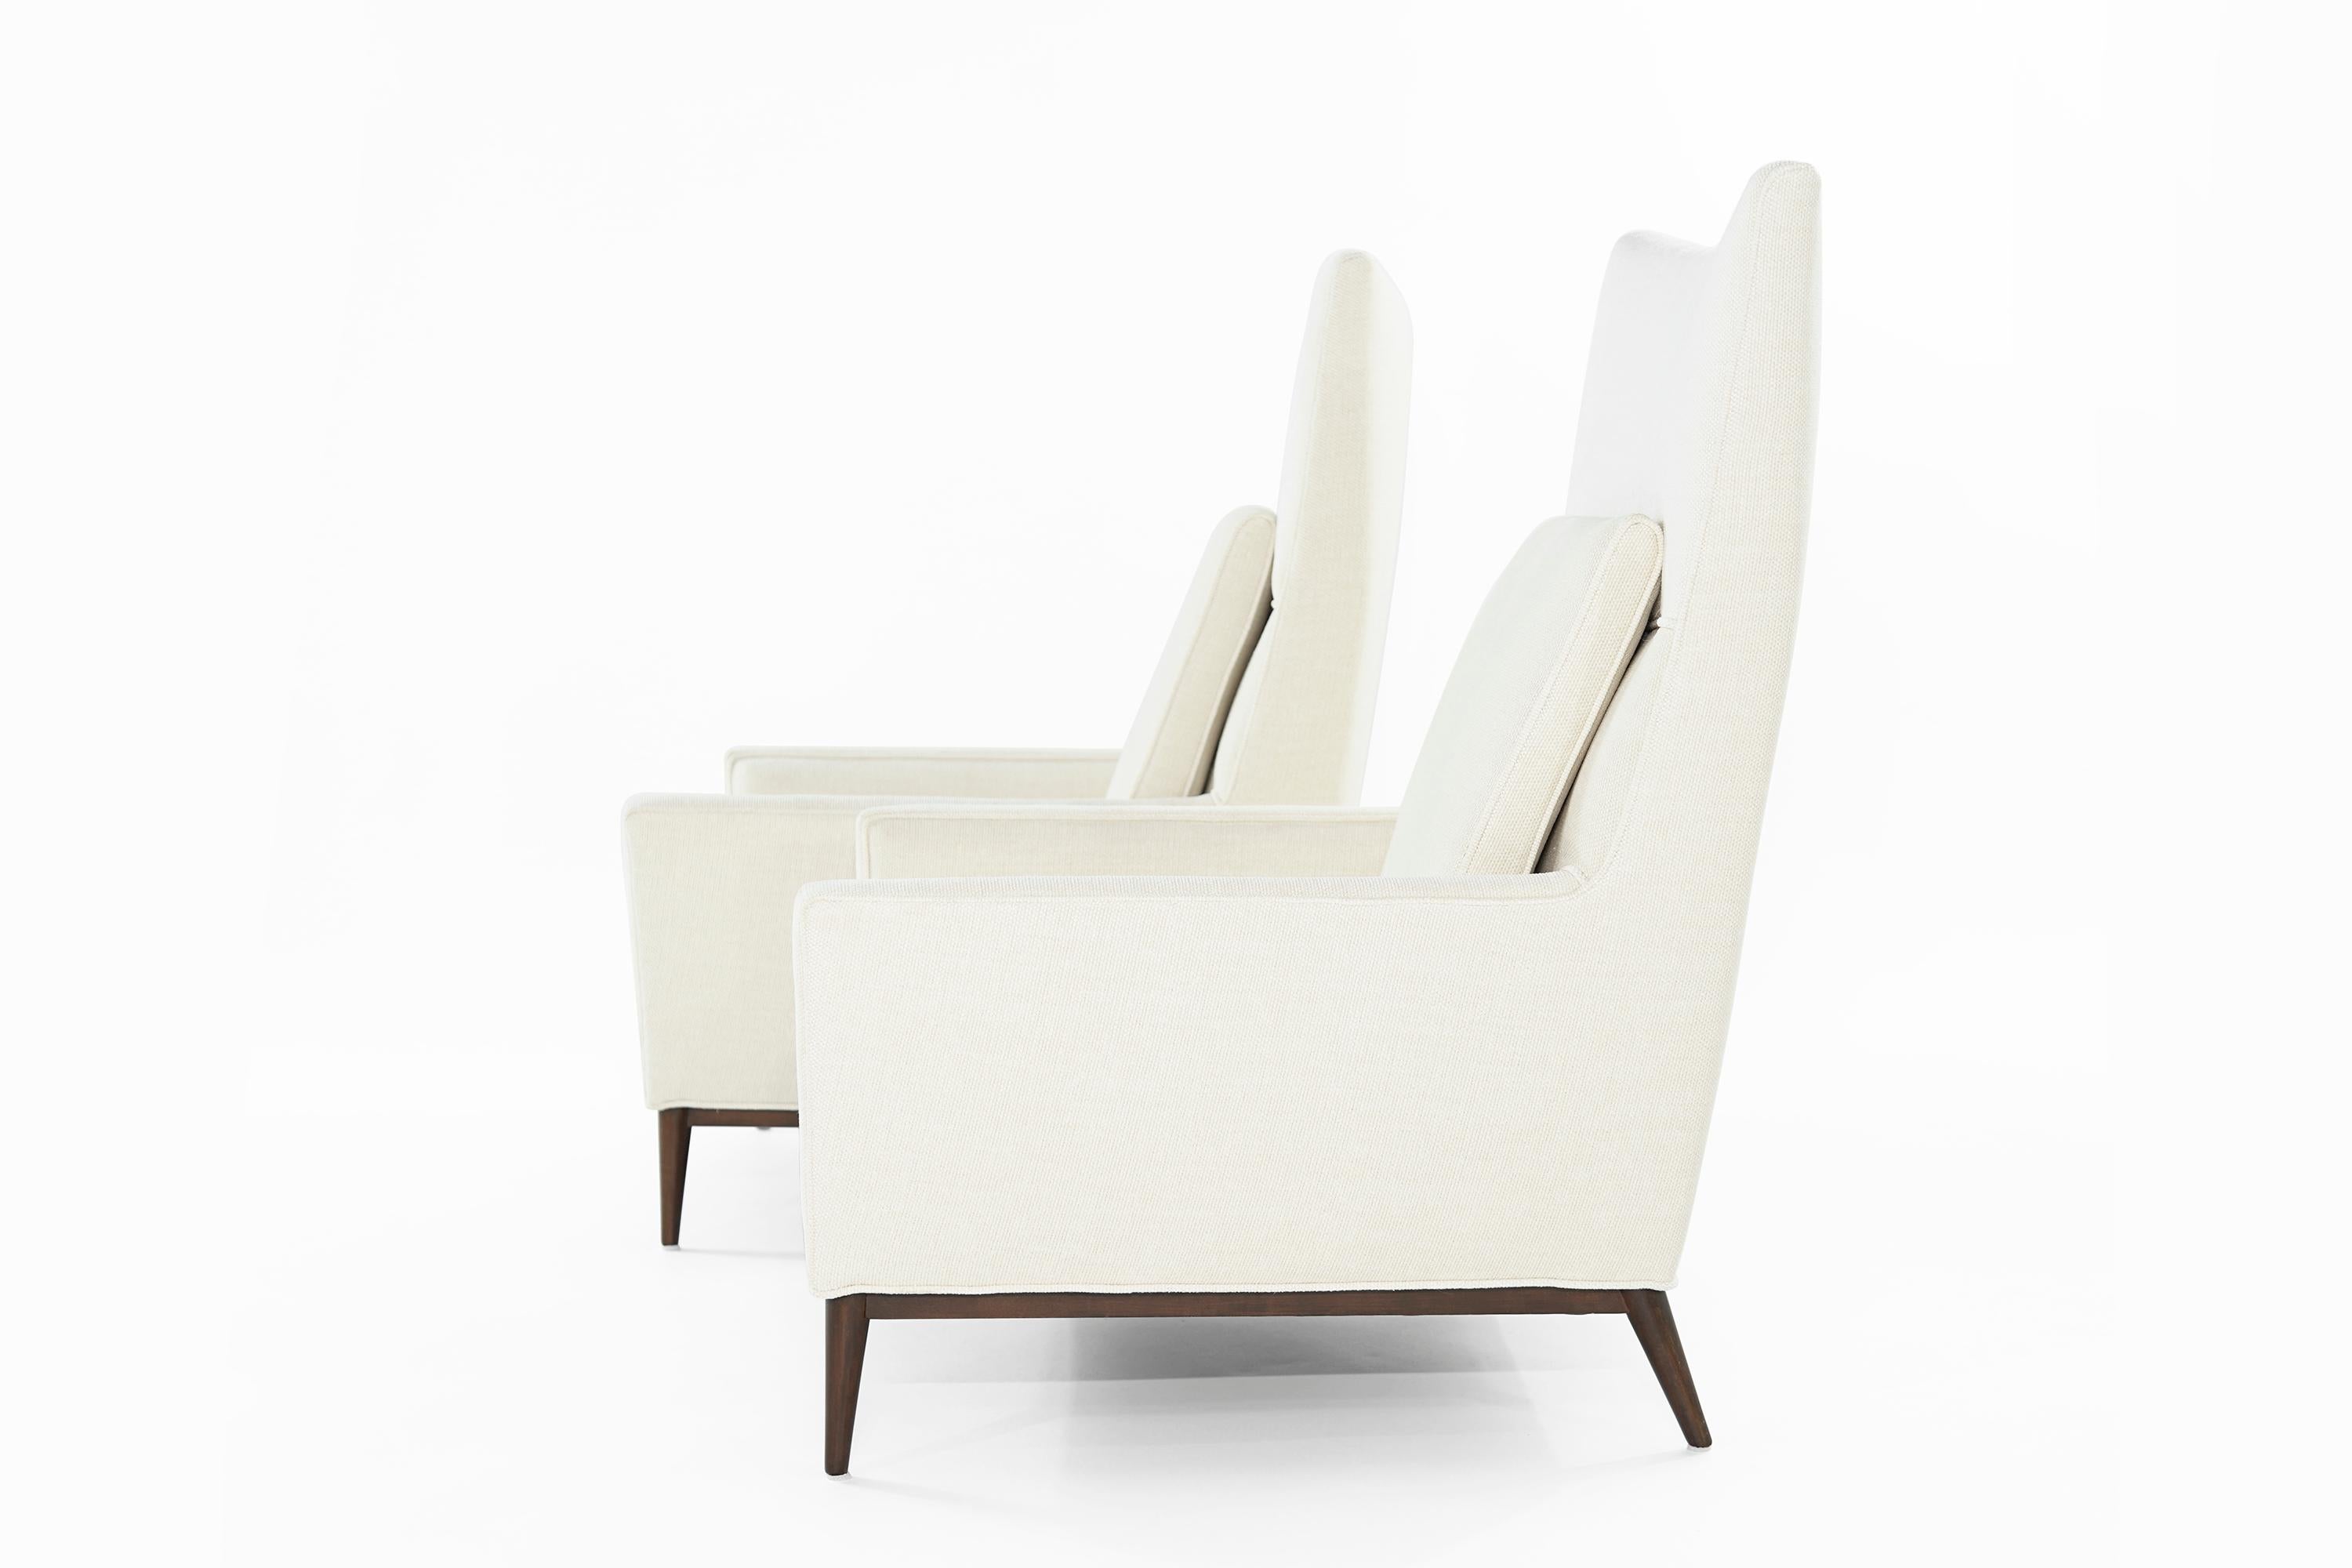 American Pair of Highback Reading Lounges by Paul McCobb, circa 1950s